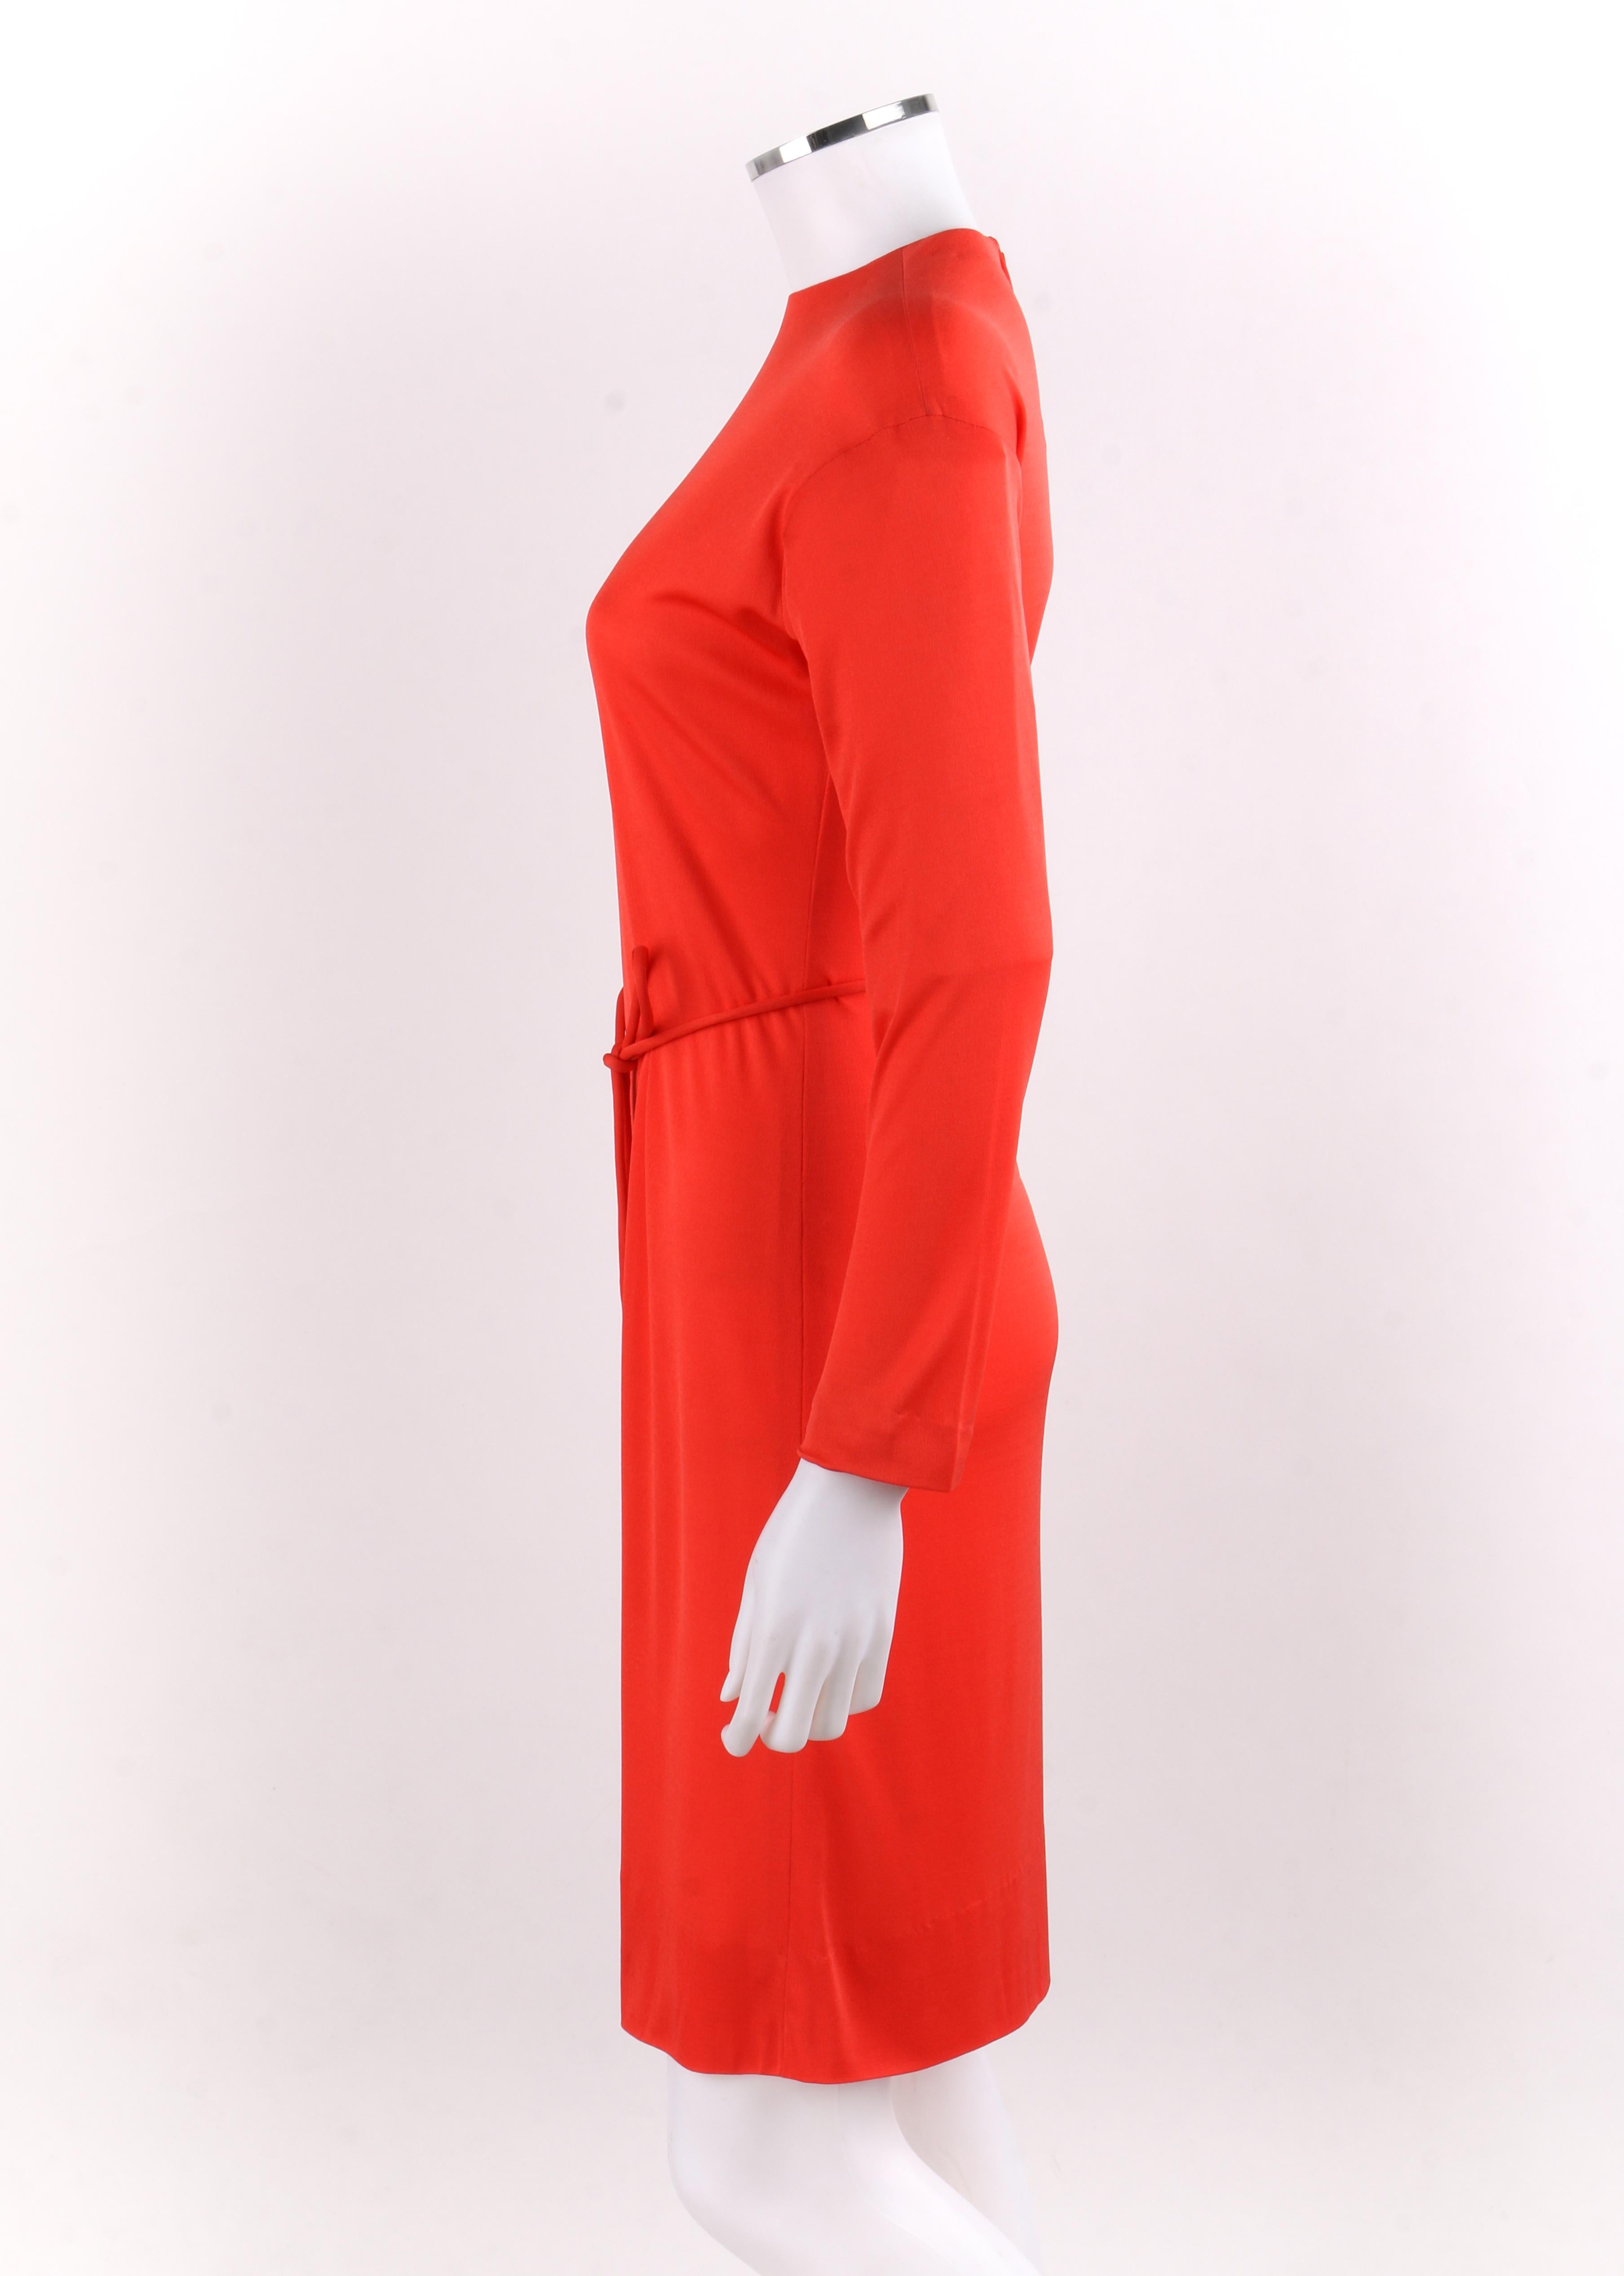 EMILIO PUCCI c.1960’s Coppola E Toppo Belted Scarlet Red Silk Jersey Dress 2